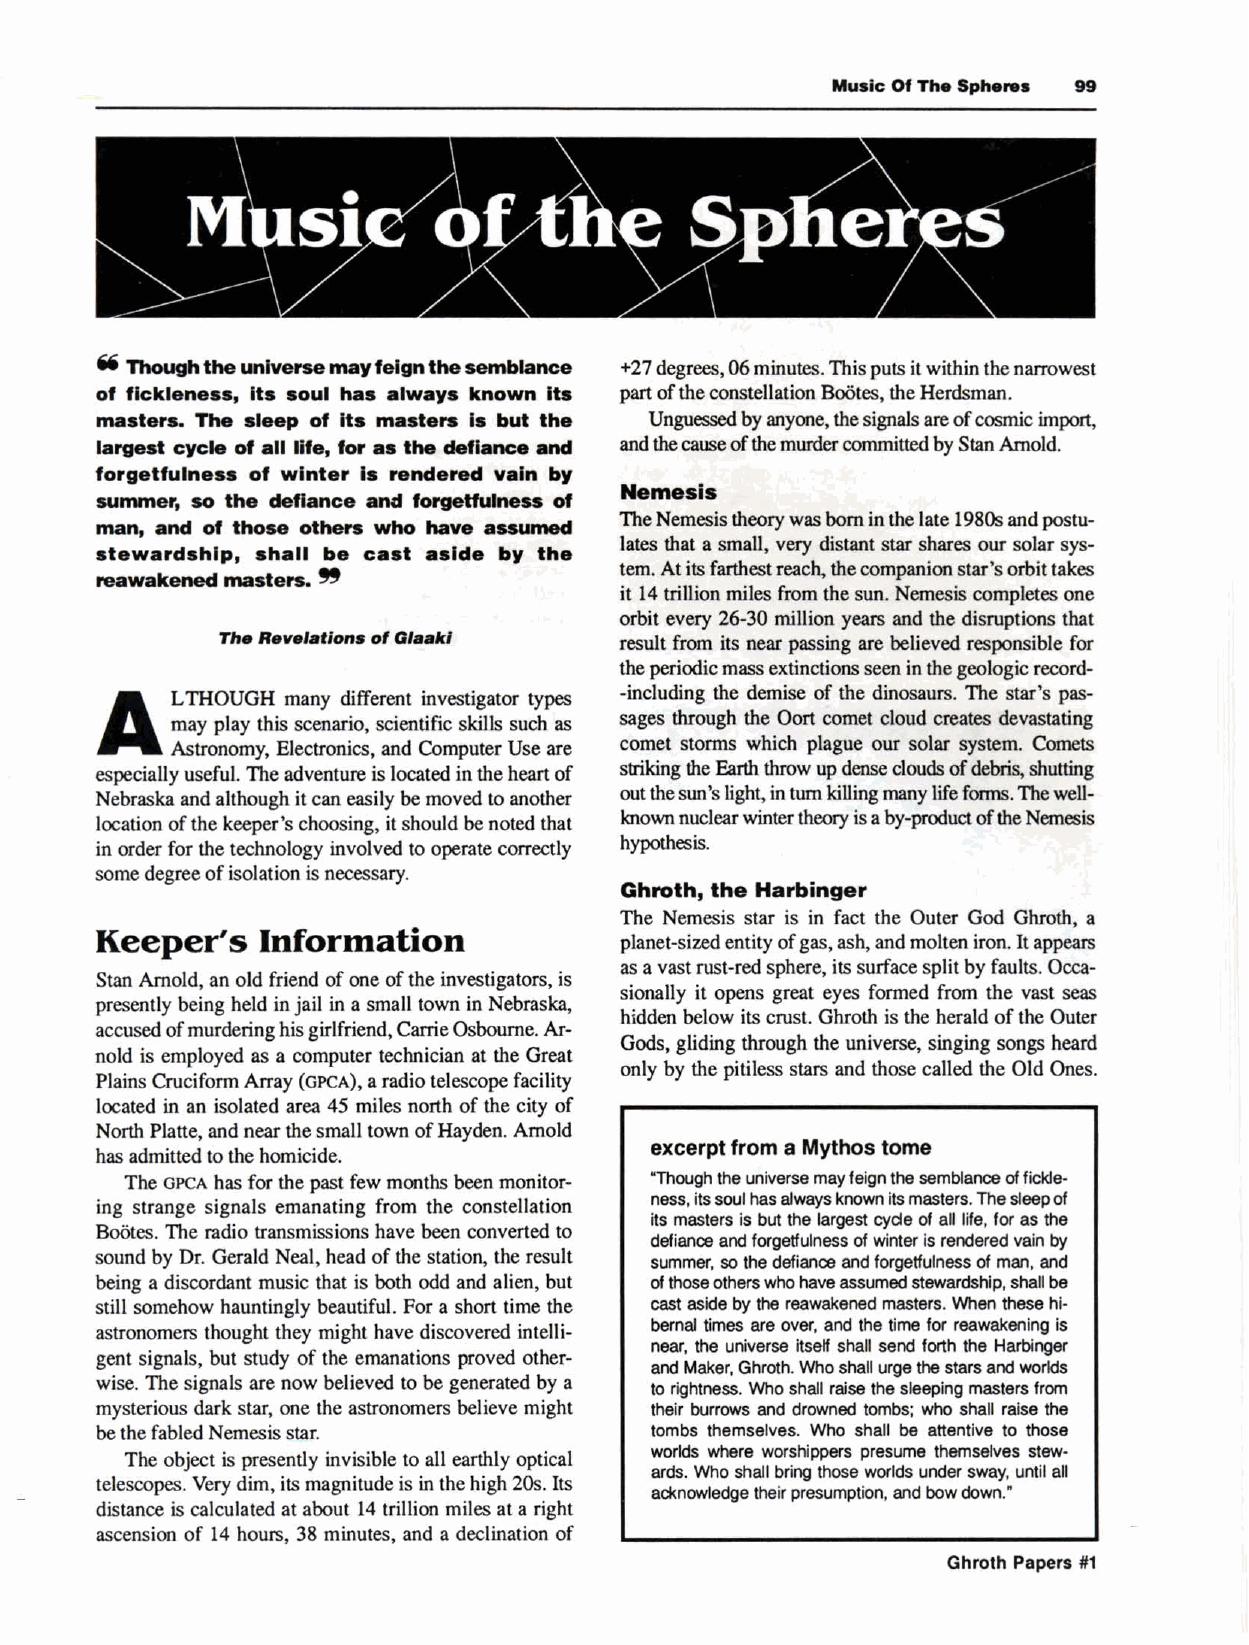 CoC 1990s Music of the Spheres